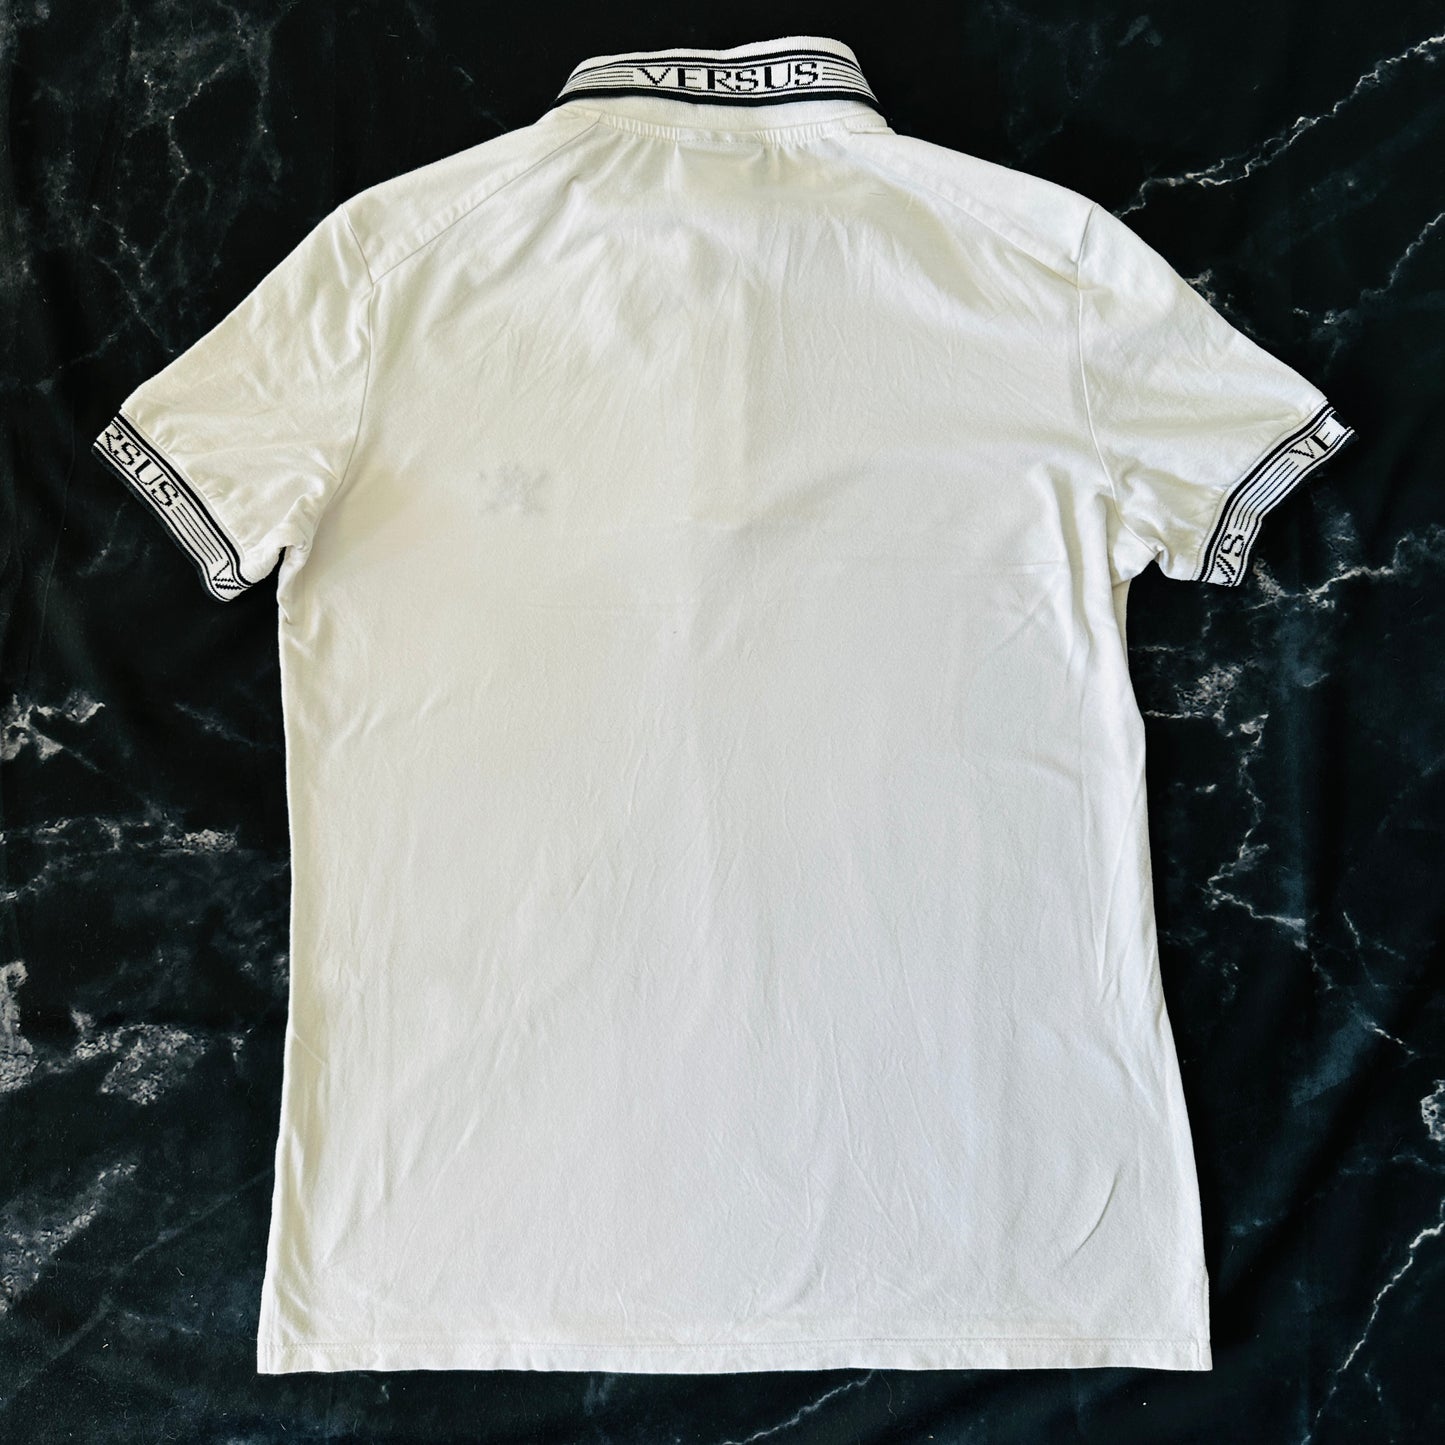 Versace Versus Polo Shirt - 52 / M - Made in Italy